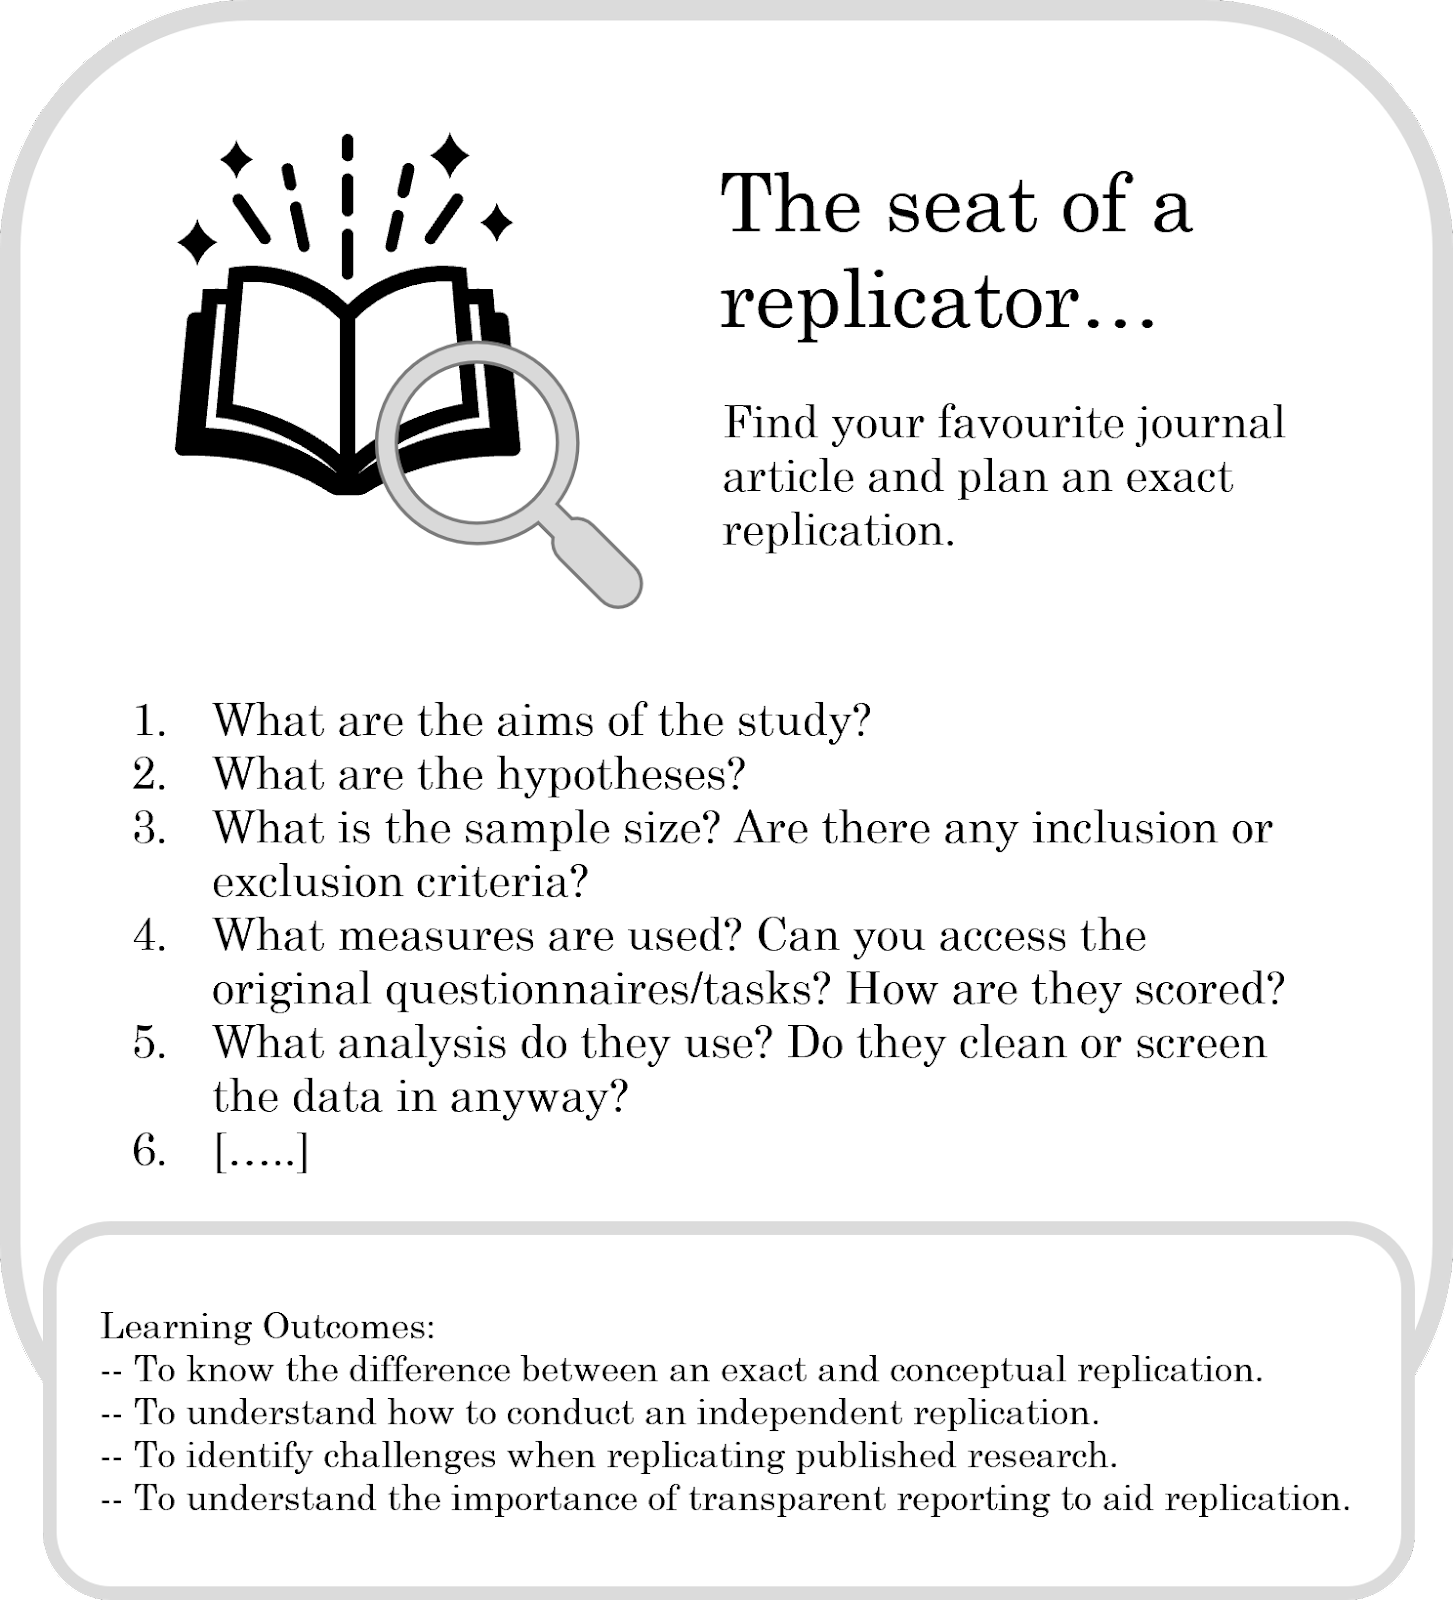 The seat of a replicator is a pedagogic activity which asks students to plan an exact replication of their favourite journal article. It set out a number of questions they need to ask about the study, such as “what is the sample size? Are there any inclusion or exclusion criteria?” The learning outcomes of this activity are: To know the difference between an exact and conceptual replication. To understand how to conduct an independent replication. To identify challenges when replicating published research. To understand the importance of transparent reporting to aid replications.